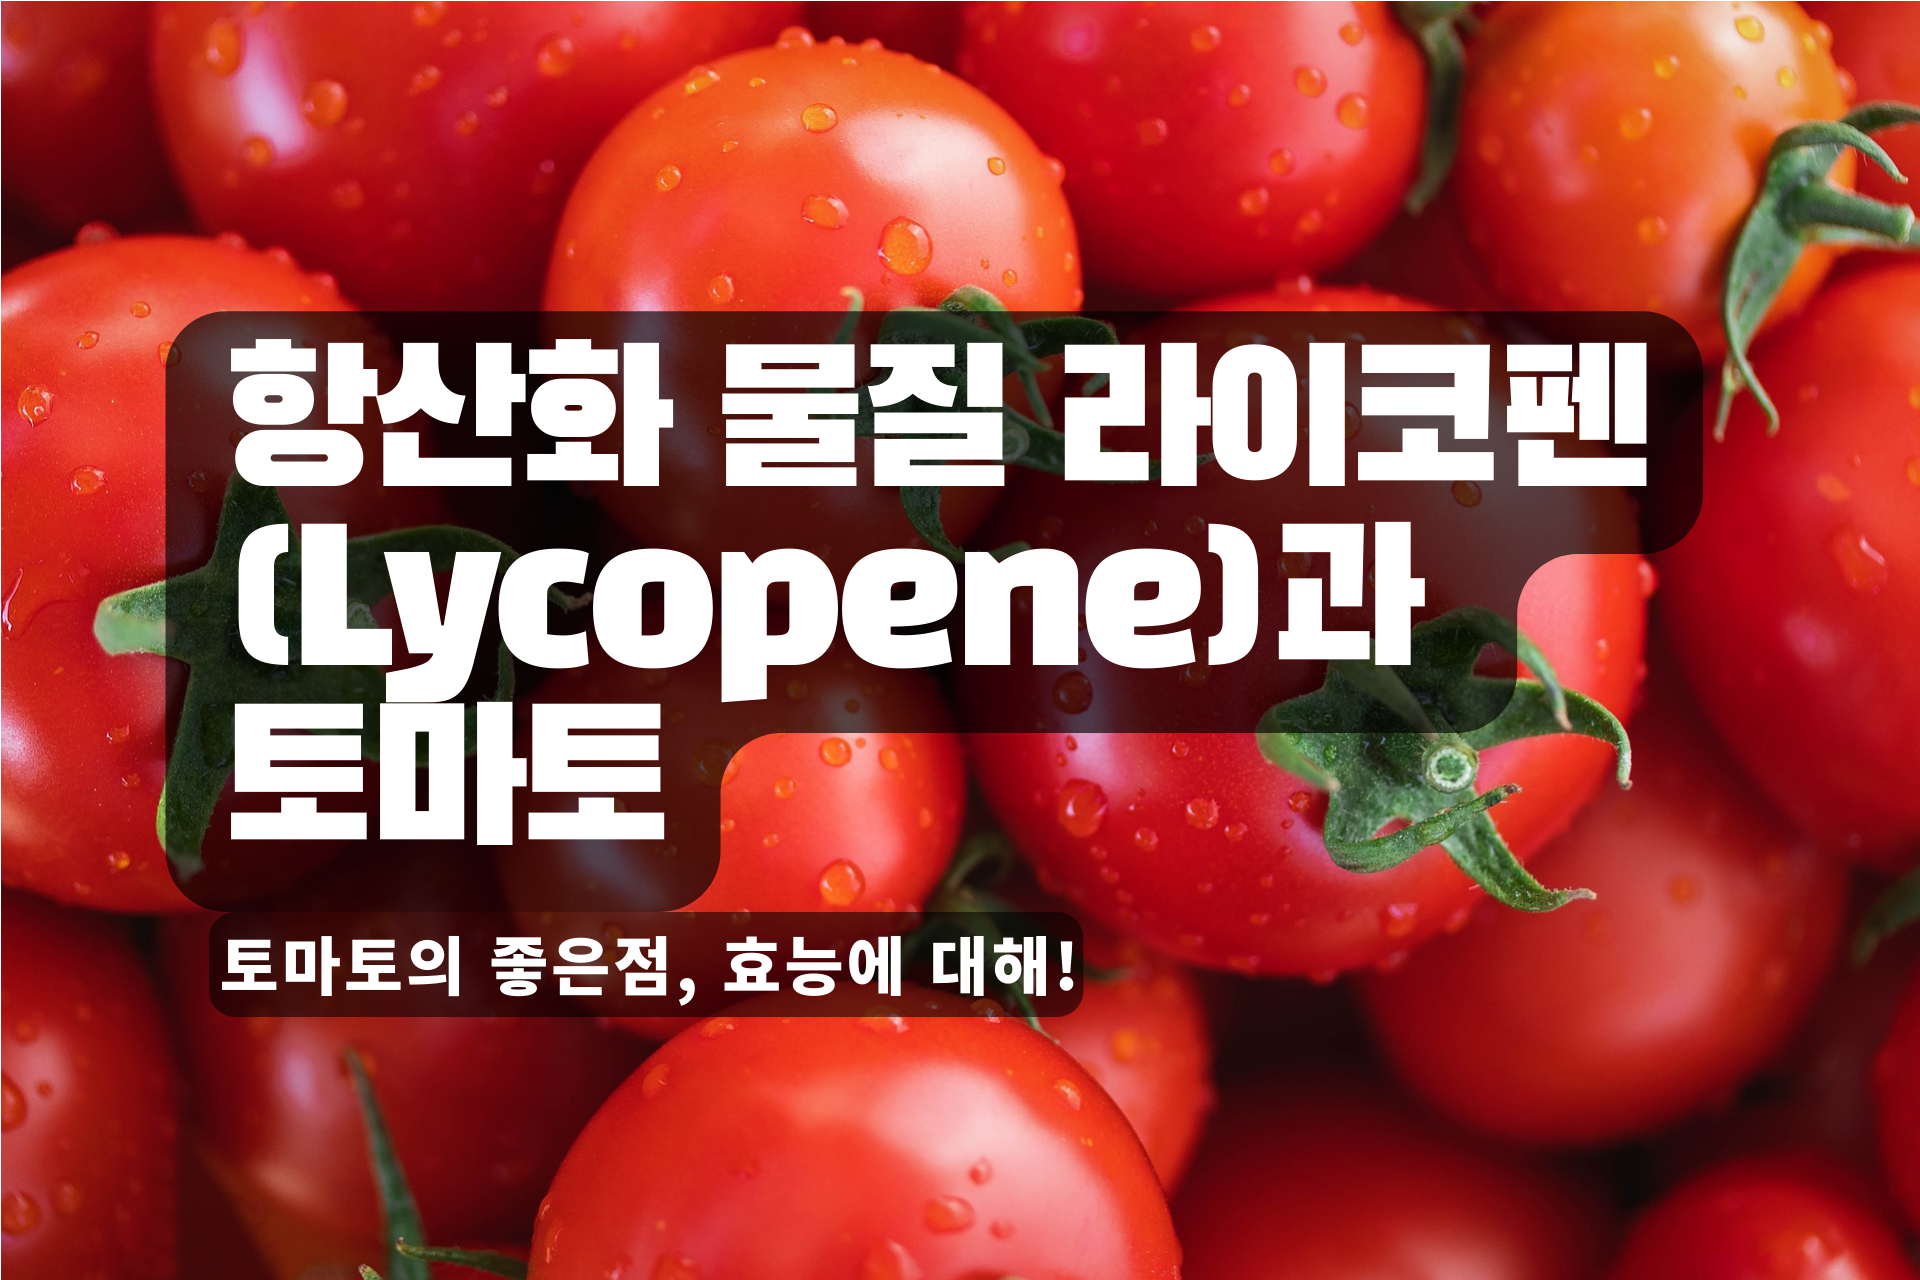 You are currently viewing 항산화 물질 라이코펜(Lycopene)과 토마토